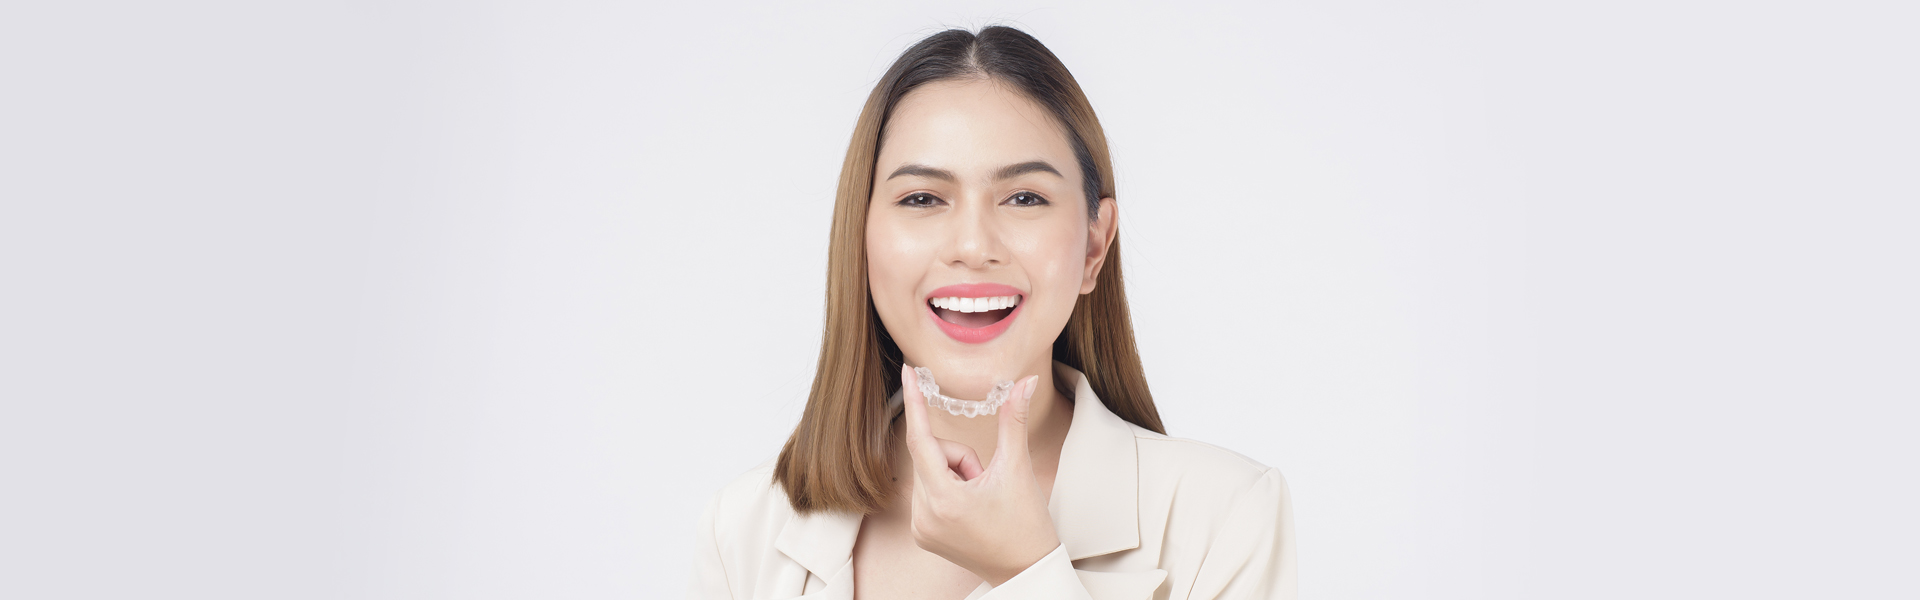 How Long Do You See Results with Invisalign?